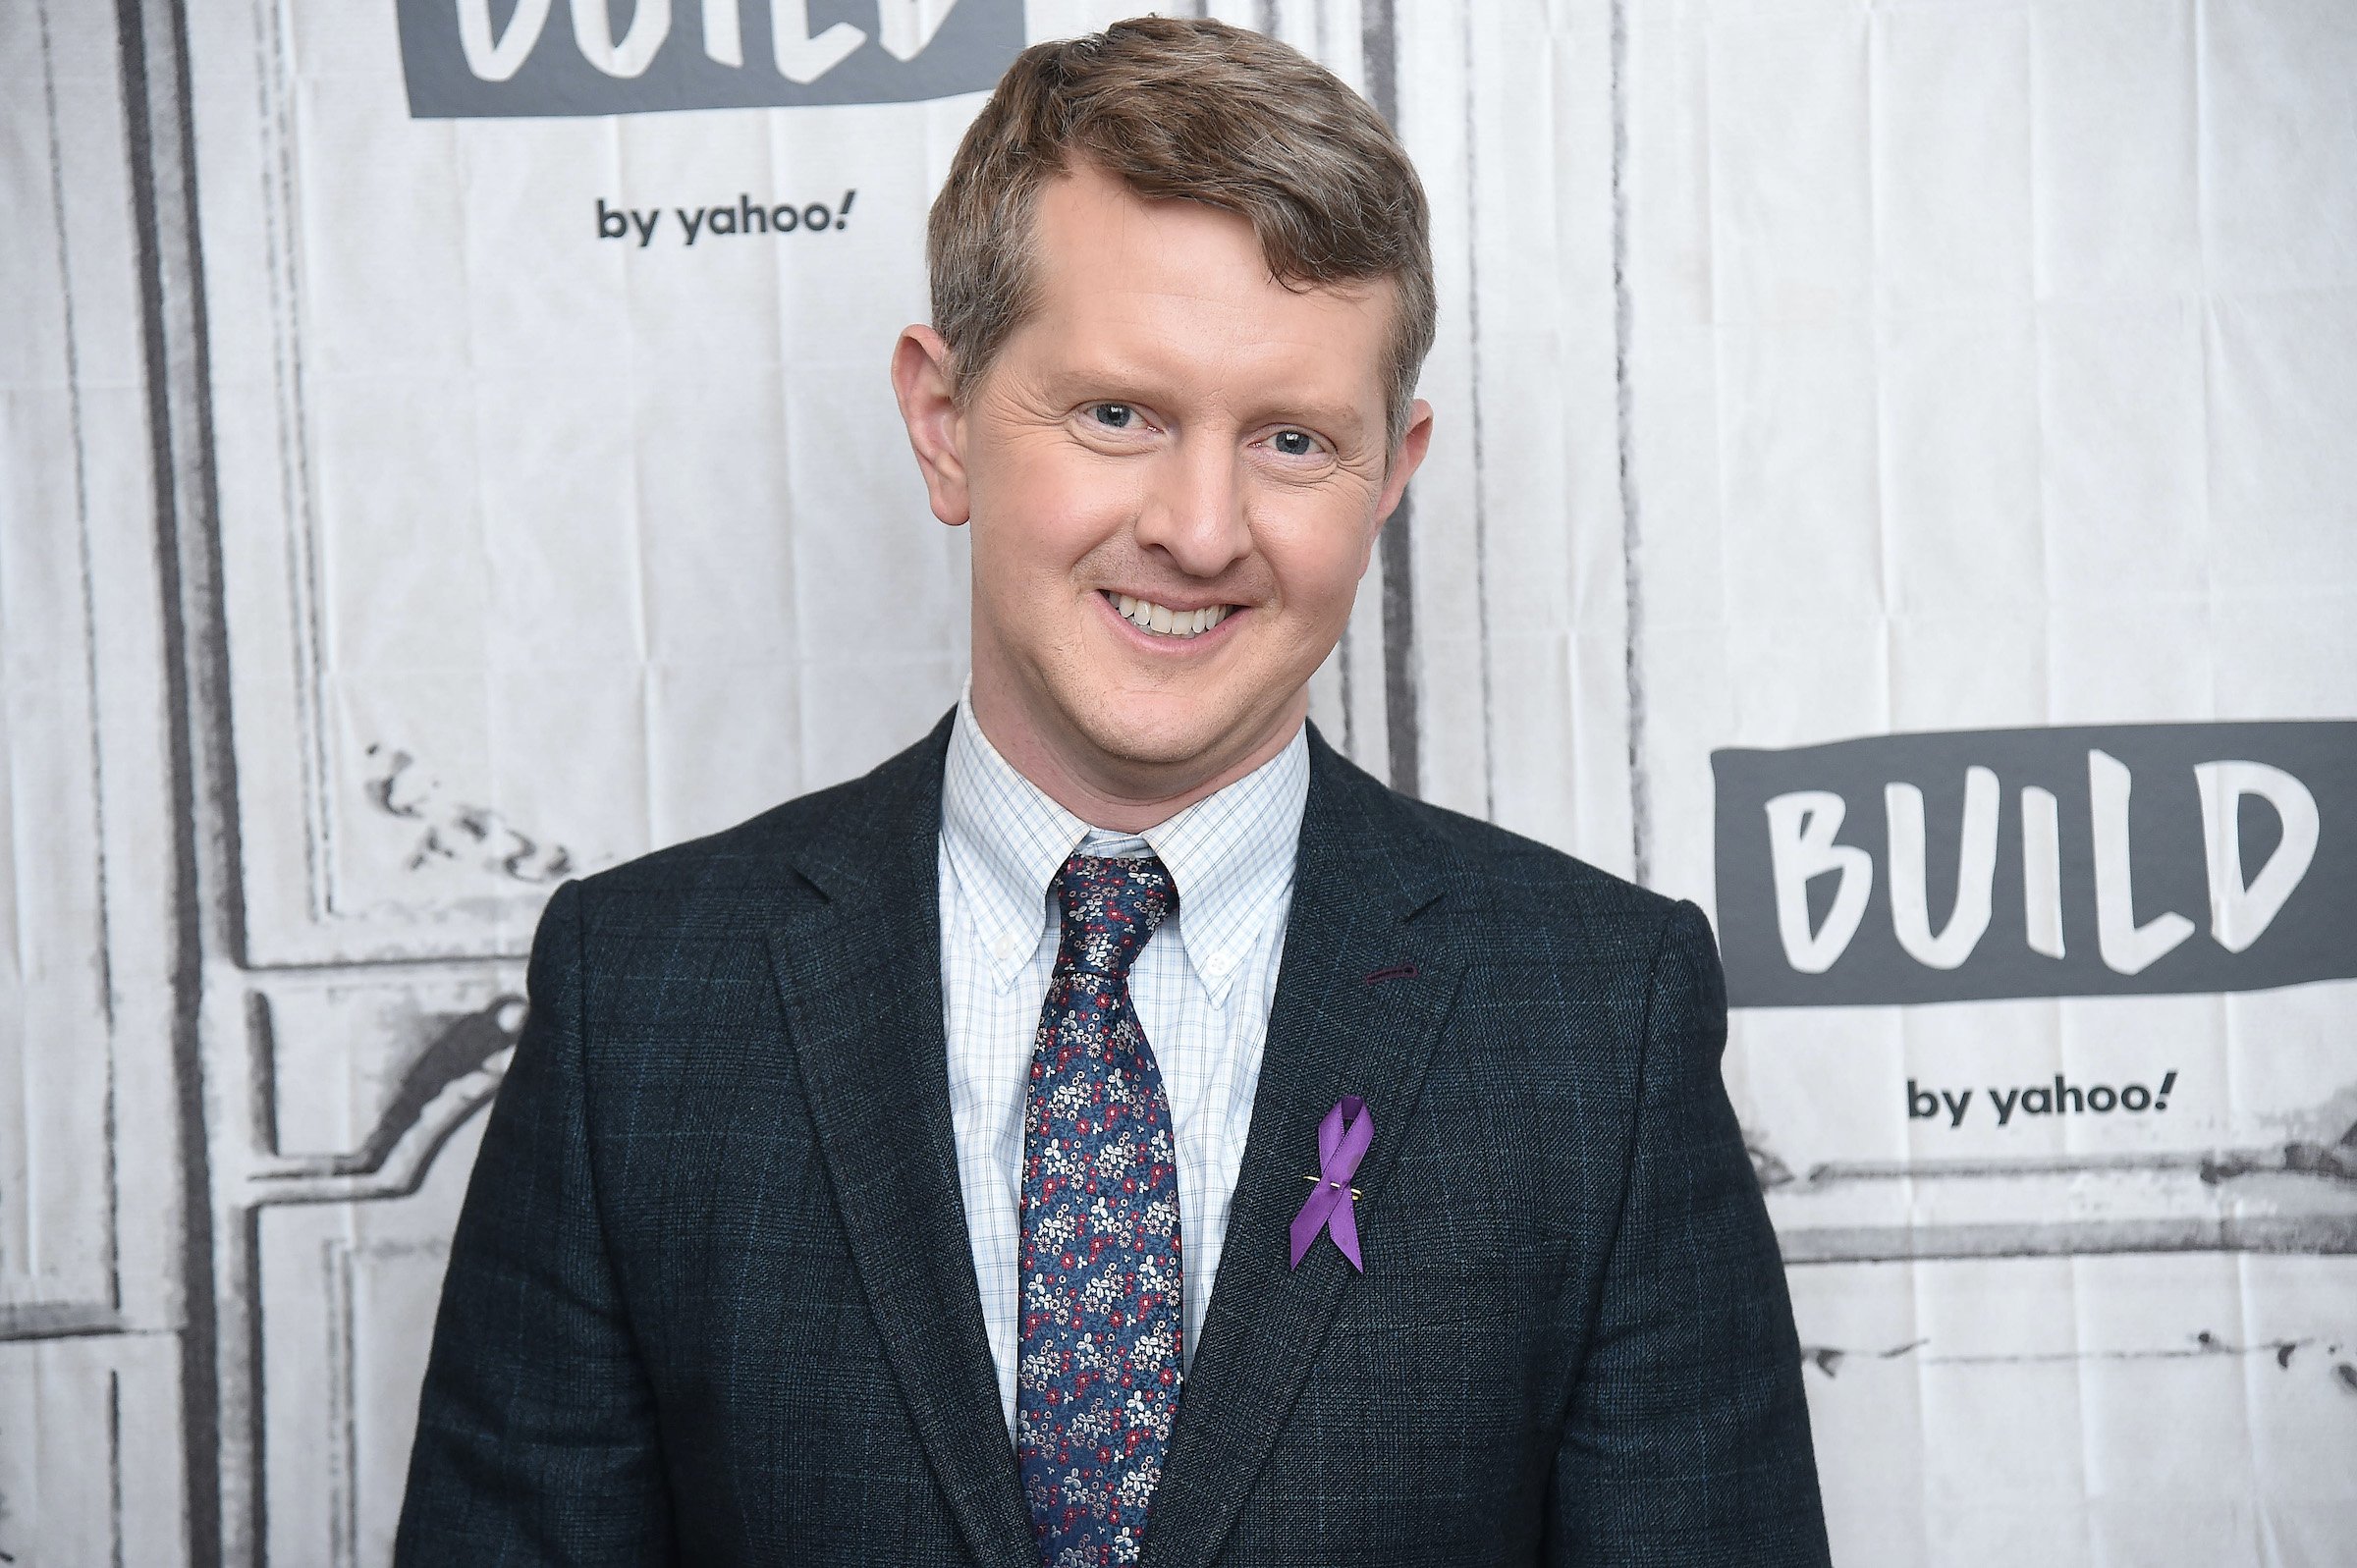 Ken Jennings poses for cameras during a visit to the Build Series